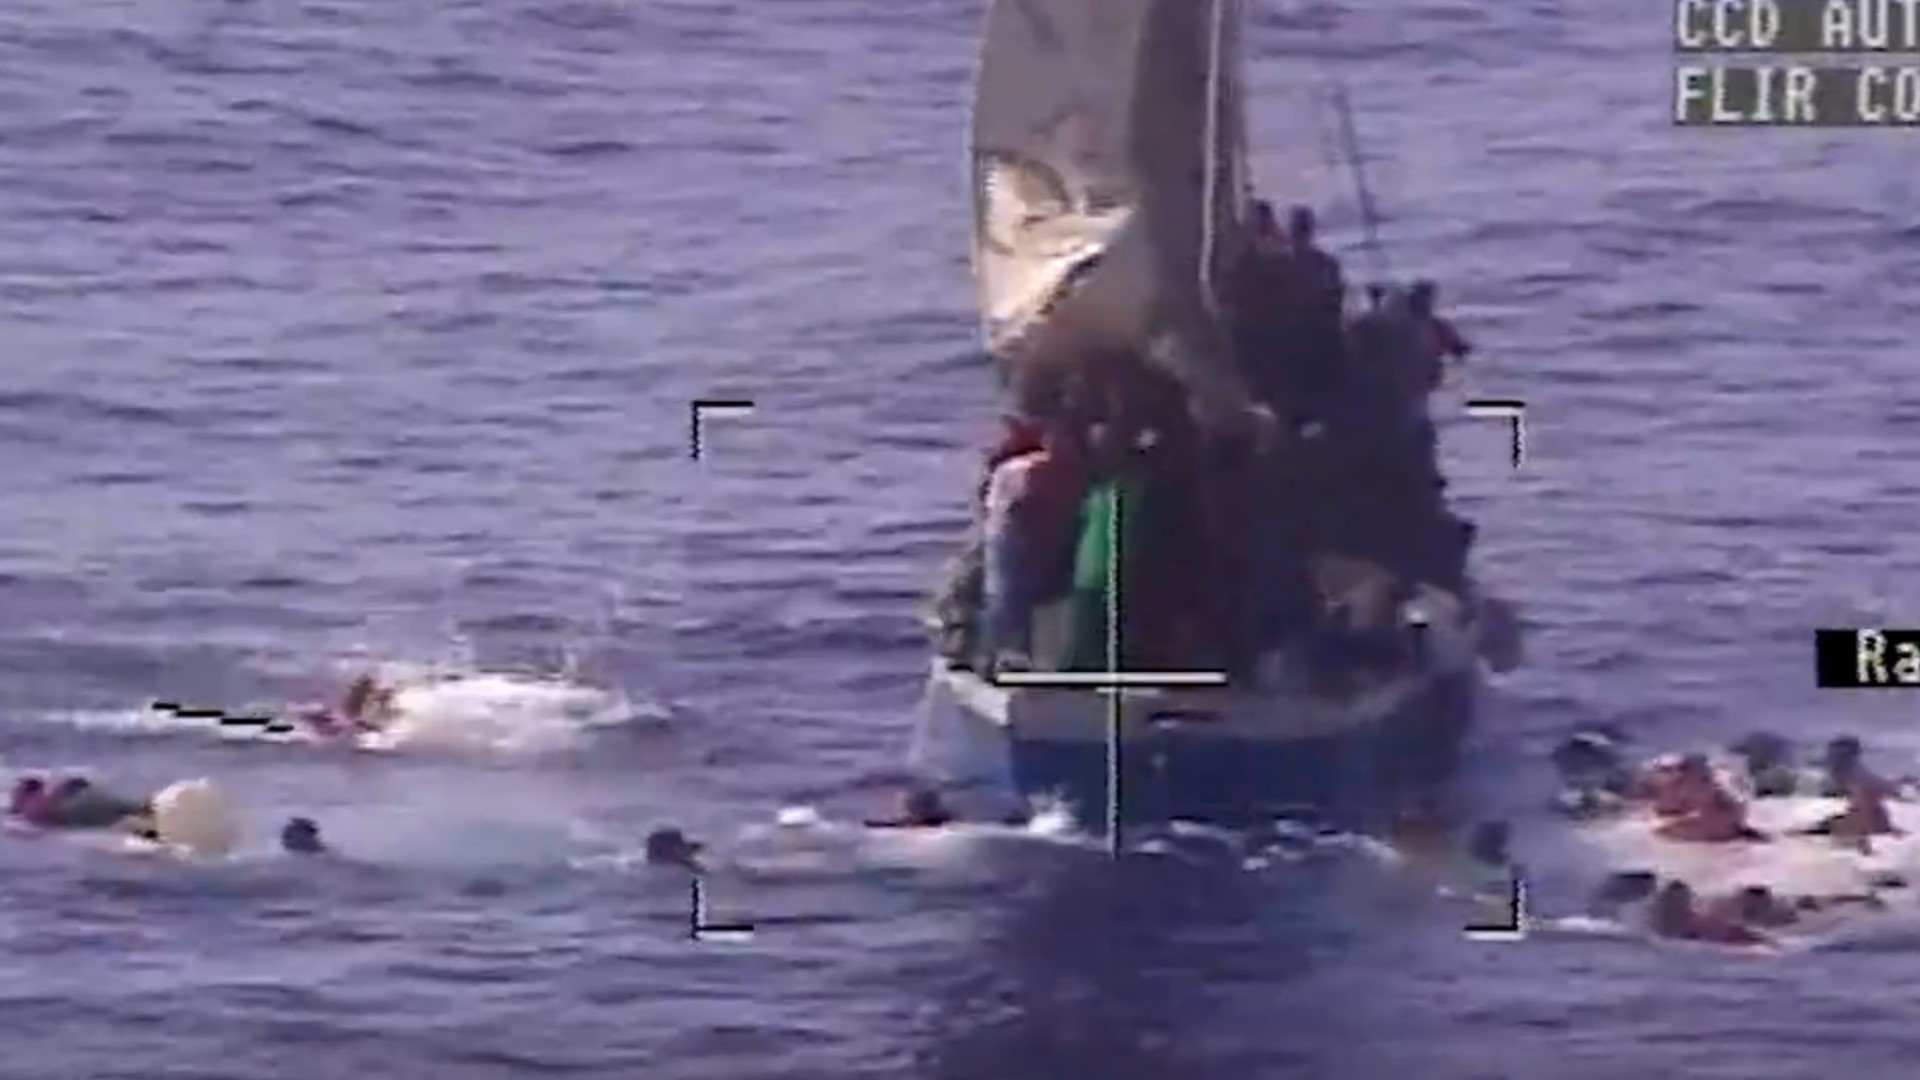 The Coast Guard has released new video in an effort to discourage migrants from trying to sail to the United States illegally.

On Wednesday, a Coast Guard Air Station Clearwater MH-60 Jayhawk helicopter crew that was deployed to the Bahamas detected a migrant boat roughly 49 miles southeast of Great Inagua.

A Coast Guard cutter crew worked with a Royal Bahamas Defense Force crew to intercept approximately 177 Haitian migrants -- seven of whom were minors. The migrants were packed aboard an overloaded 45-foot wooden freighter.

Then on Thursday, a Customs Air and Marine Branch aircraft spotted a 20-foot vessel roughly 46 miles east of Boca Raton and dispatched another cutter that intercepted that boat, which had 14 Haitian migrants and two suspected smugglers aboard.